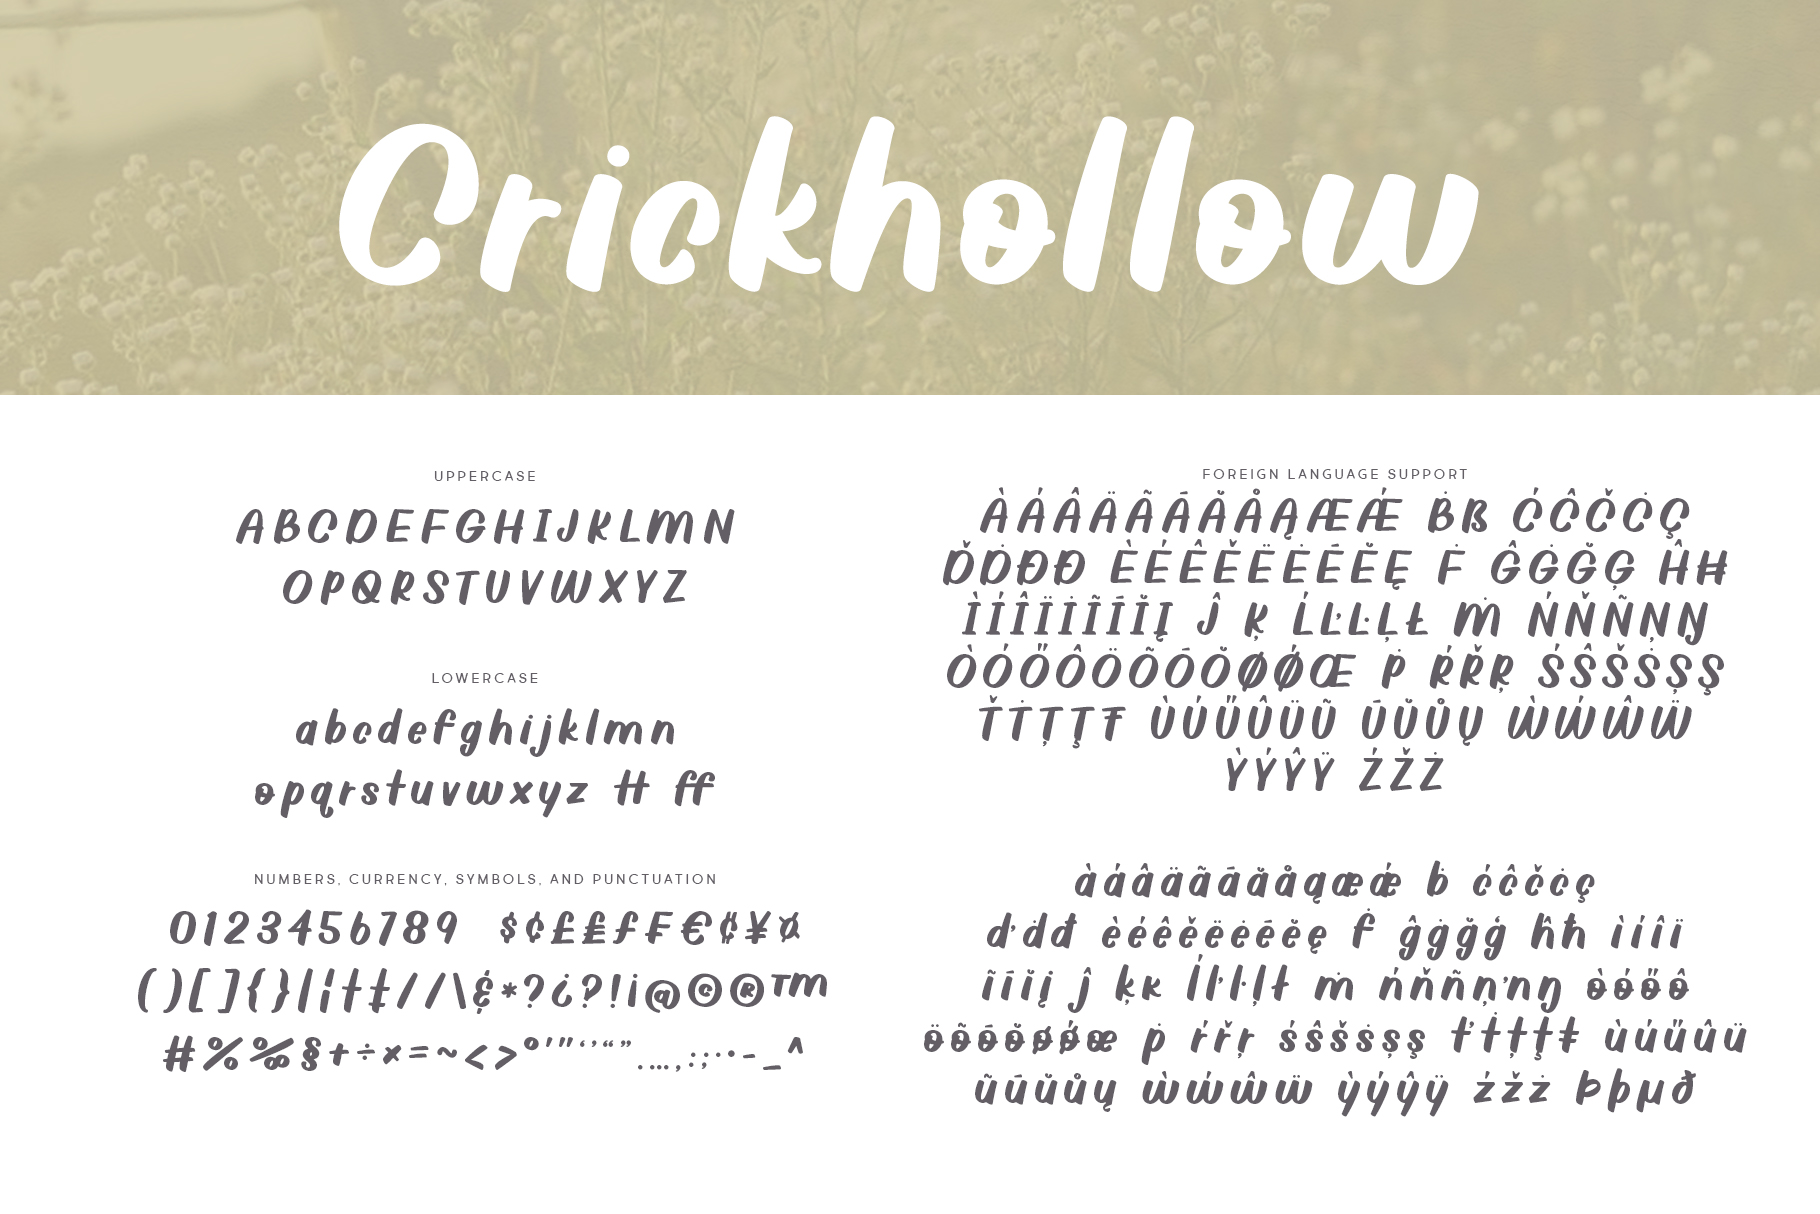 Crickhollow Demo Font Free For Personal